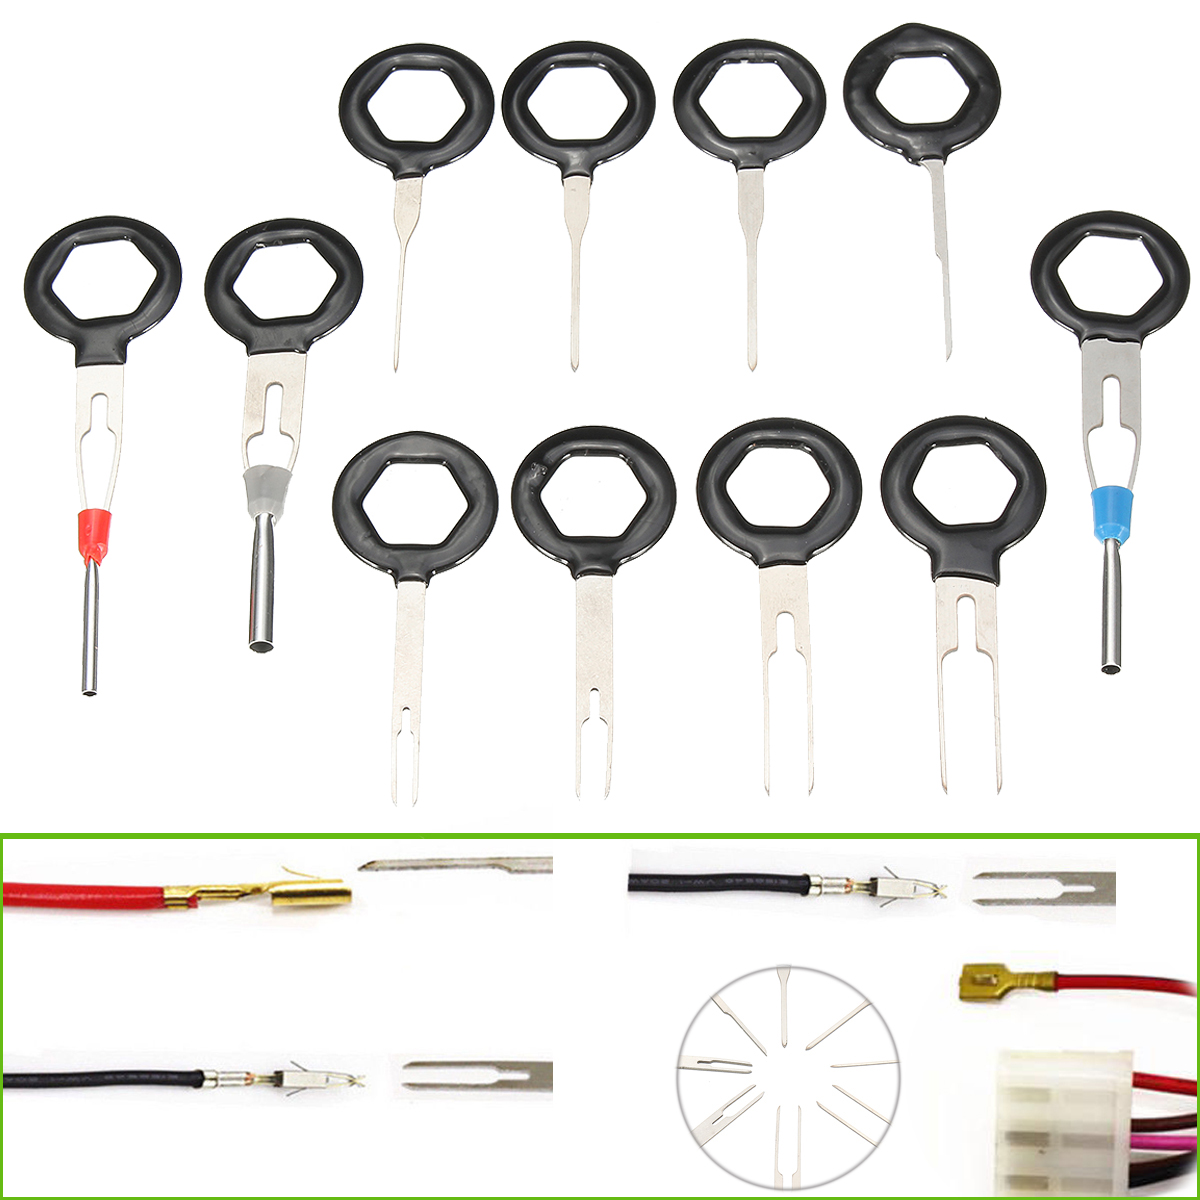 Excellwayreg-11Pcs-Terminal-Removal-Tool-Kit-Wiring-Connector-Pin-Release-Extractor-1179384-9